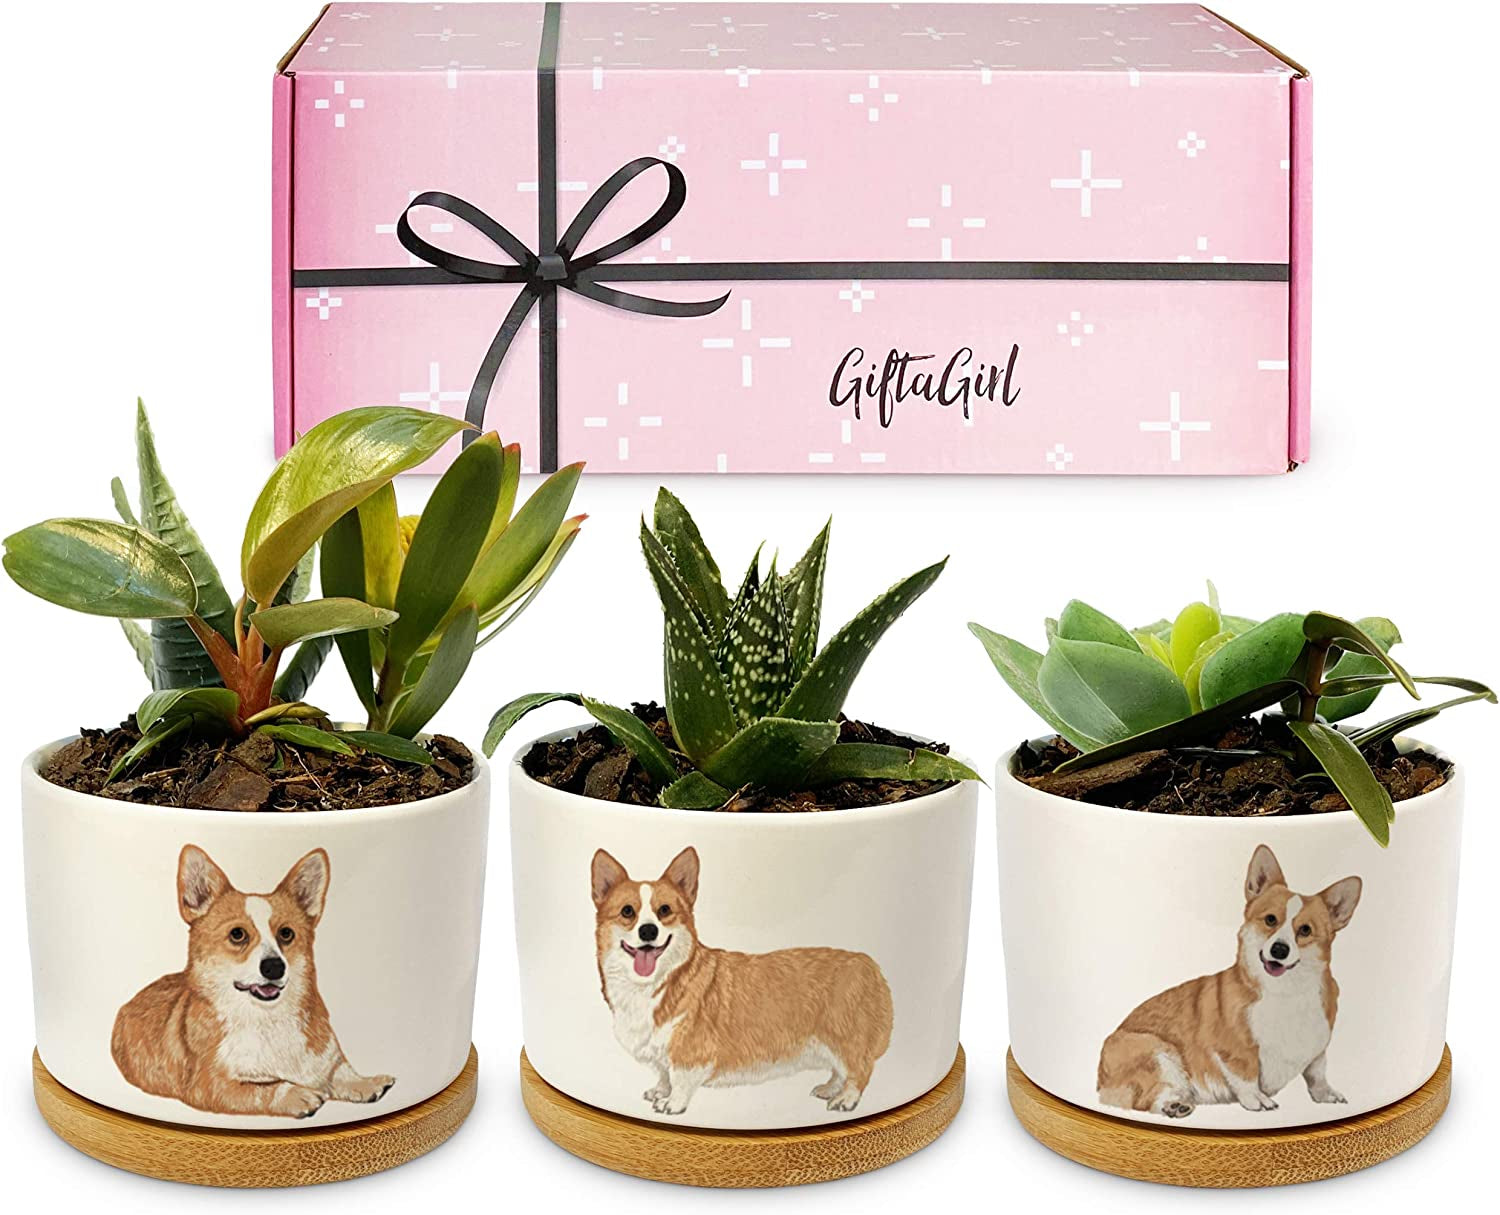 GIFTAGIRL, GIFTAGIRL 60Th Birthday Gifts for Women - Keepsake 60Th Birthday Gift Idea, like Our Pretty Pots Are for 60 Year Old Women or 60Th Birthday Decor and Arrive Beautifully Gift Boxed